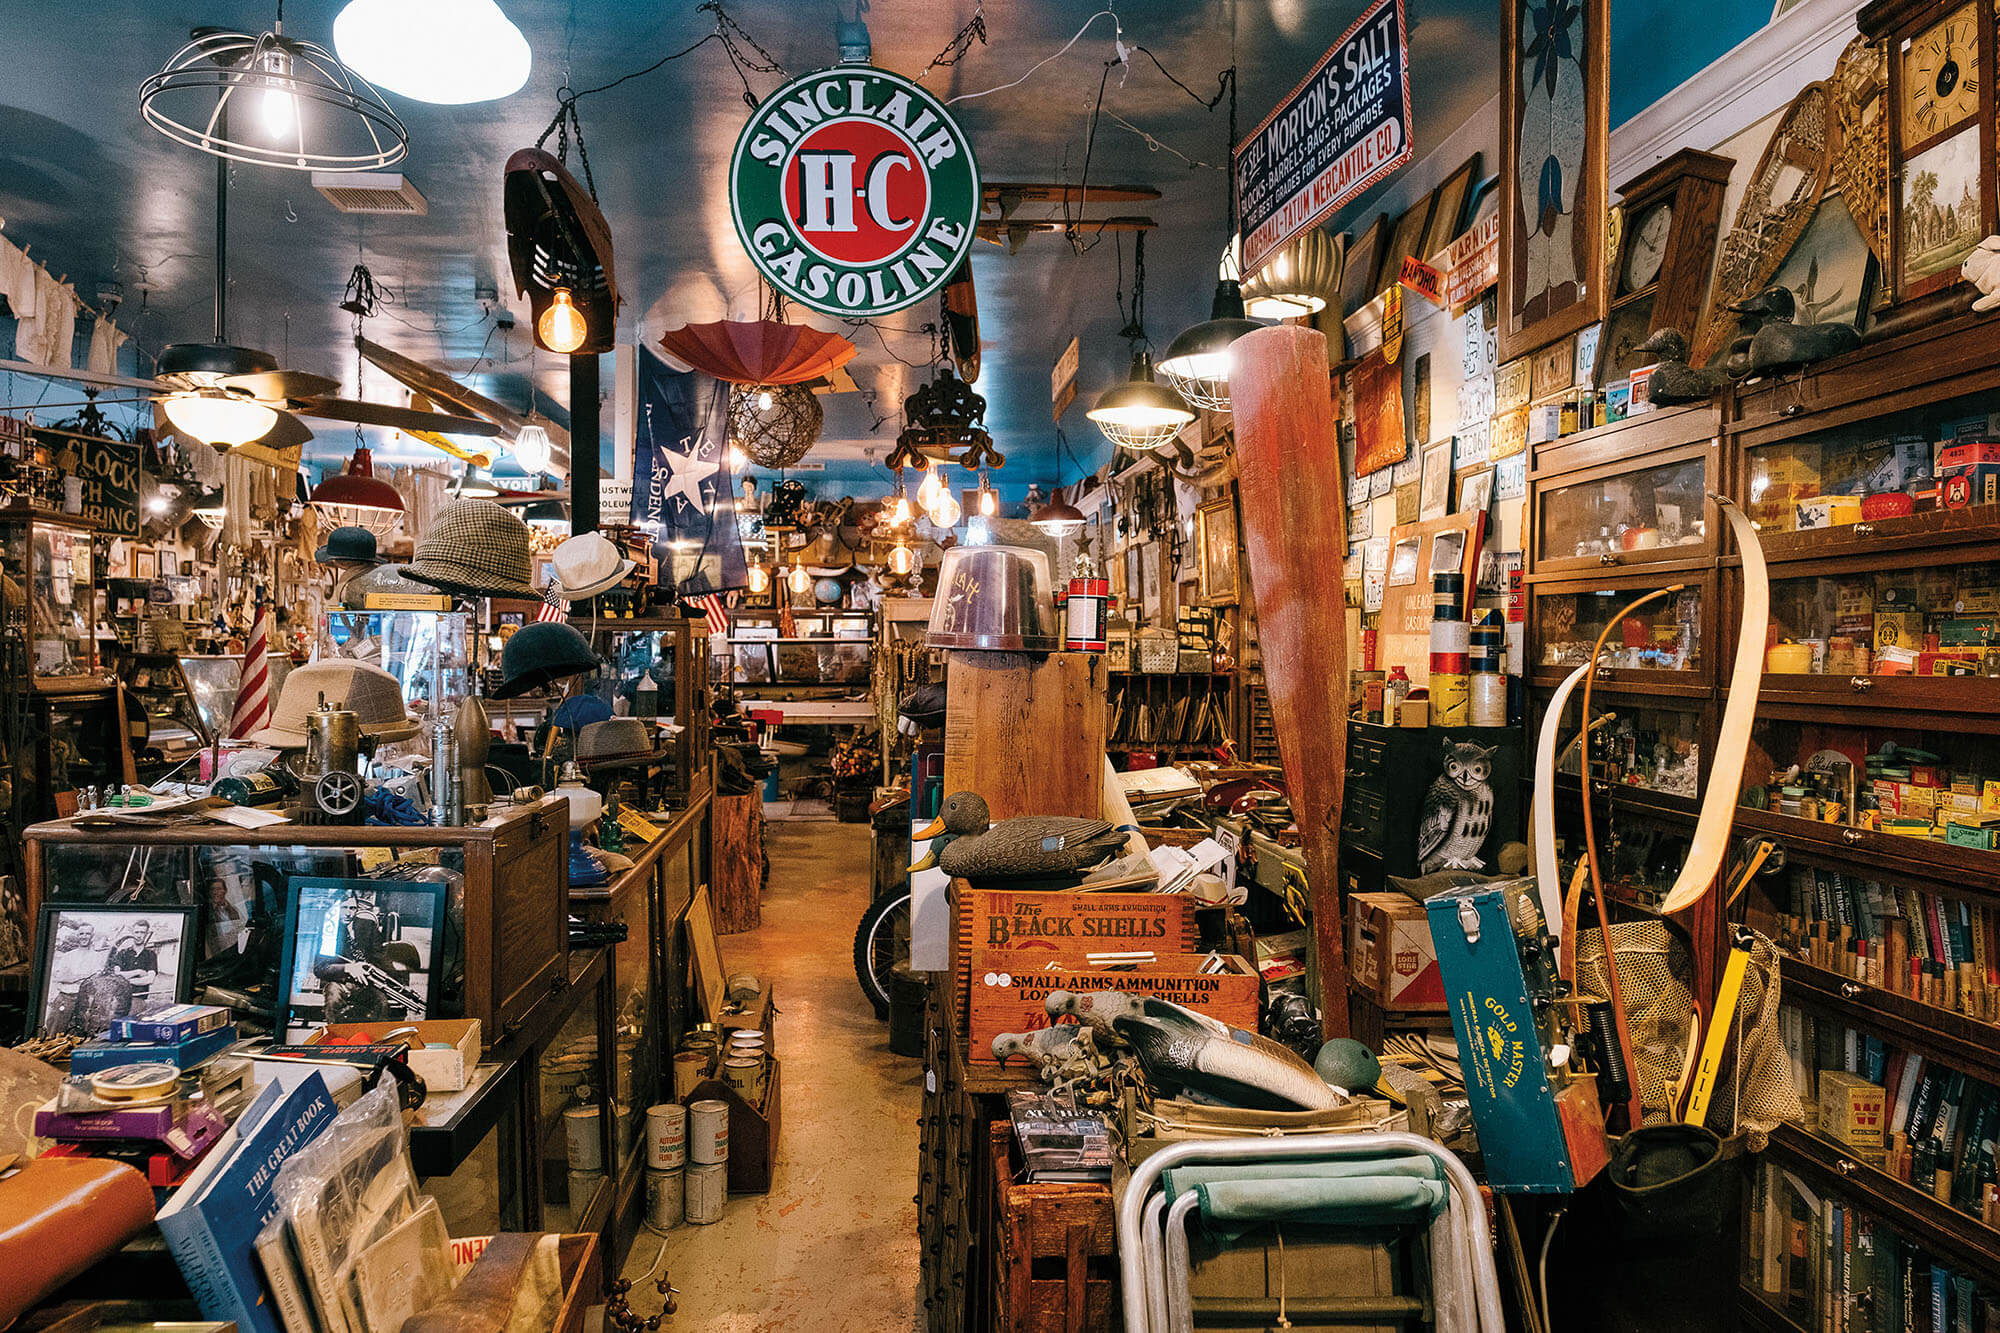 The inside of a cluttered antique store with numerous old signs and products on display